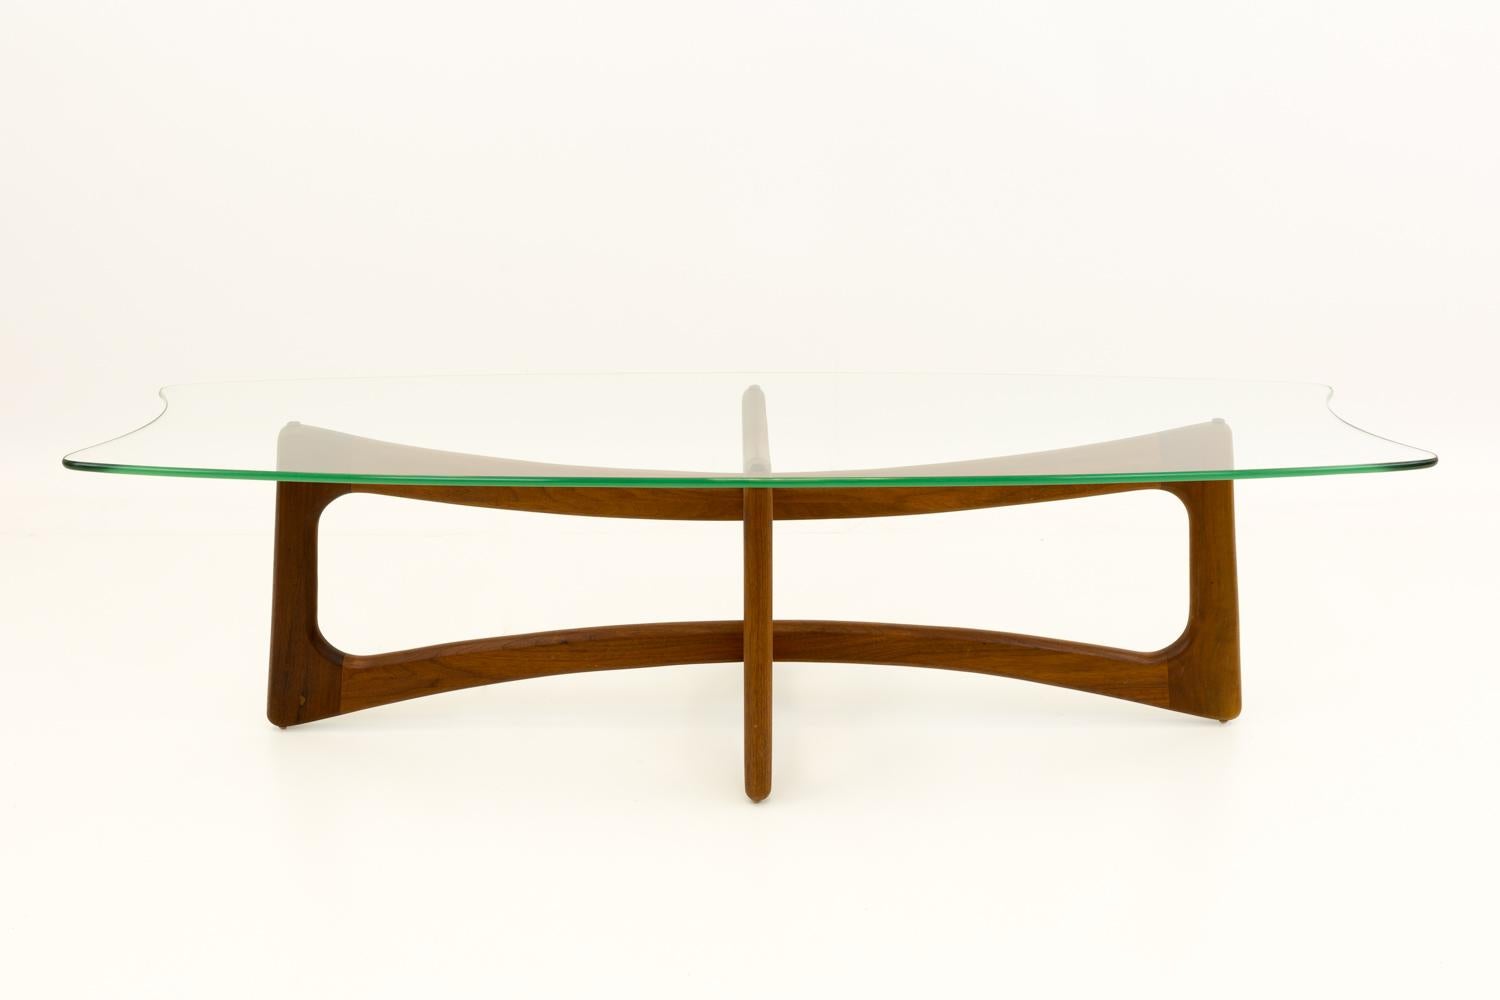 Adrian Pearsall mid century ribbon coffee table with stingray glass top
Coffee table measures: 59 wide x 20 deep x 16 inches high

?All pieces of furniture can be had in what we call restored vintage condition. That means the piece is restored